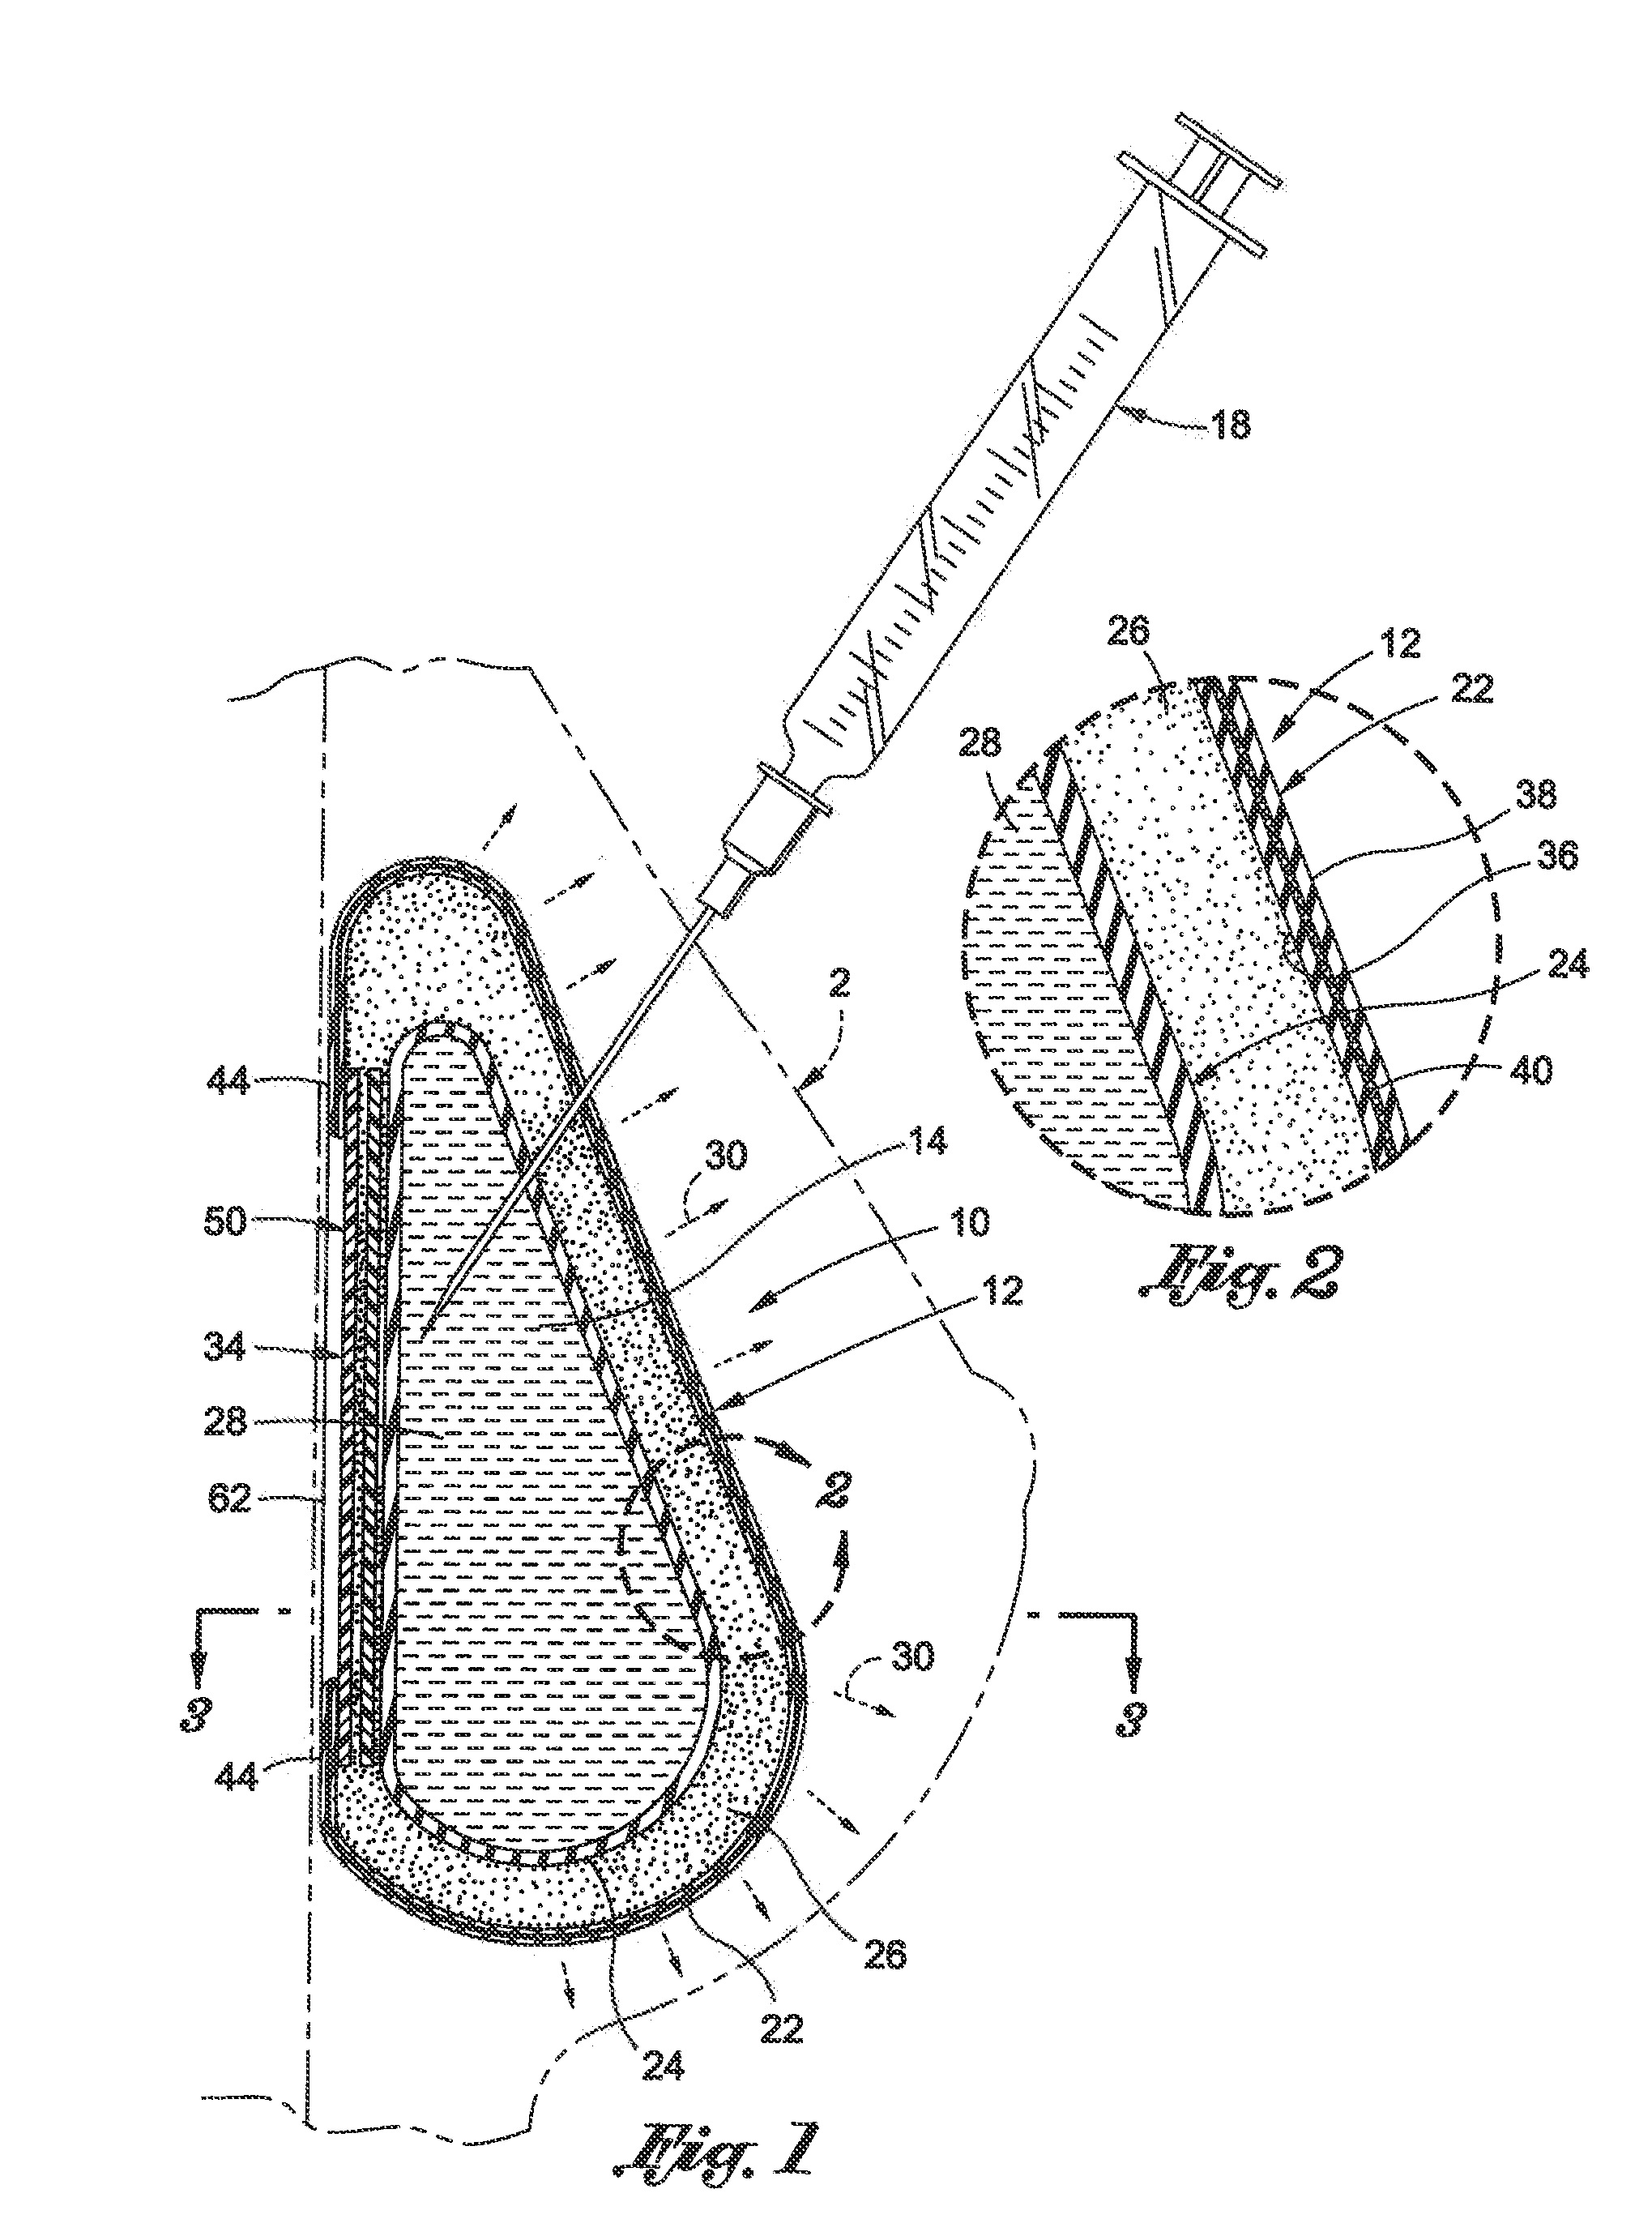 Inflatable prostheses and methods of making same